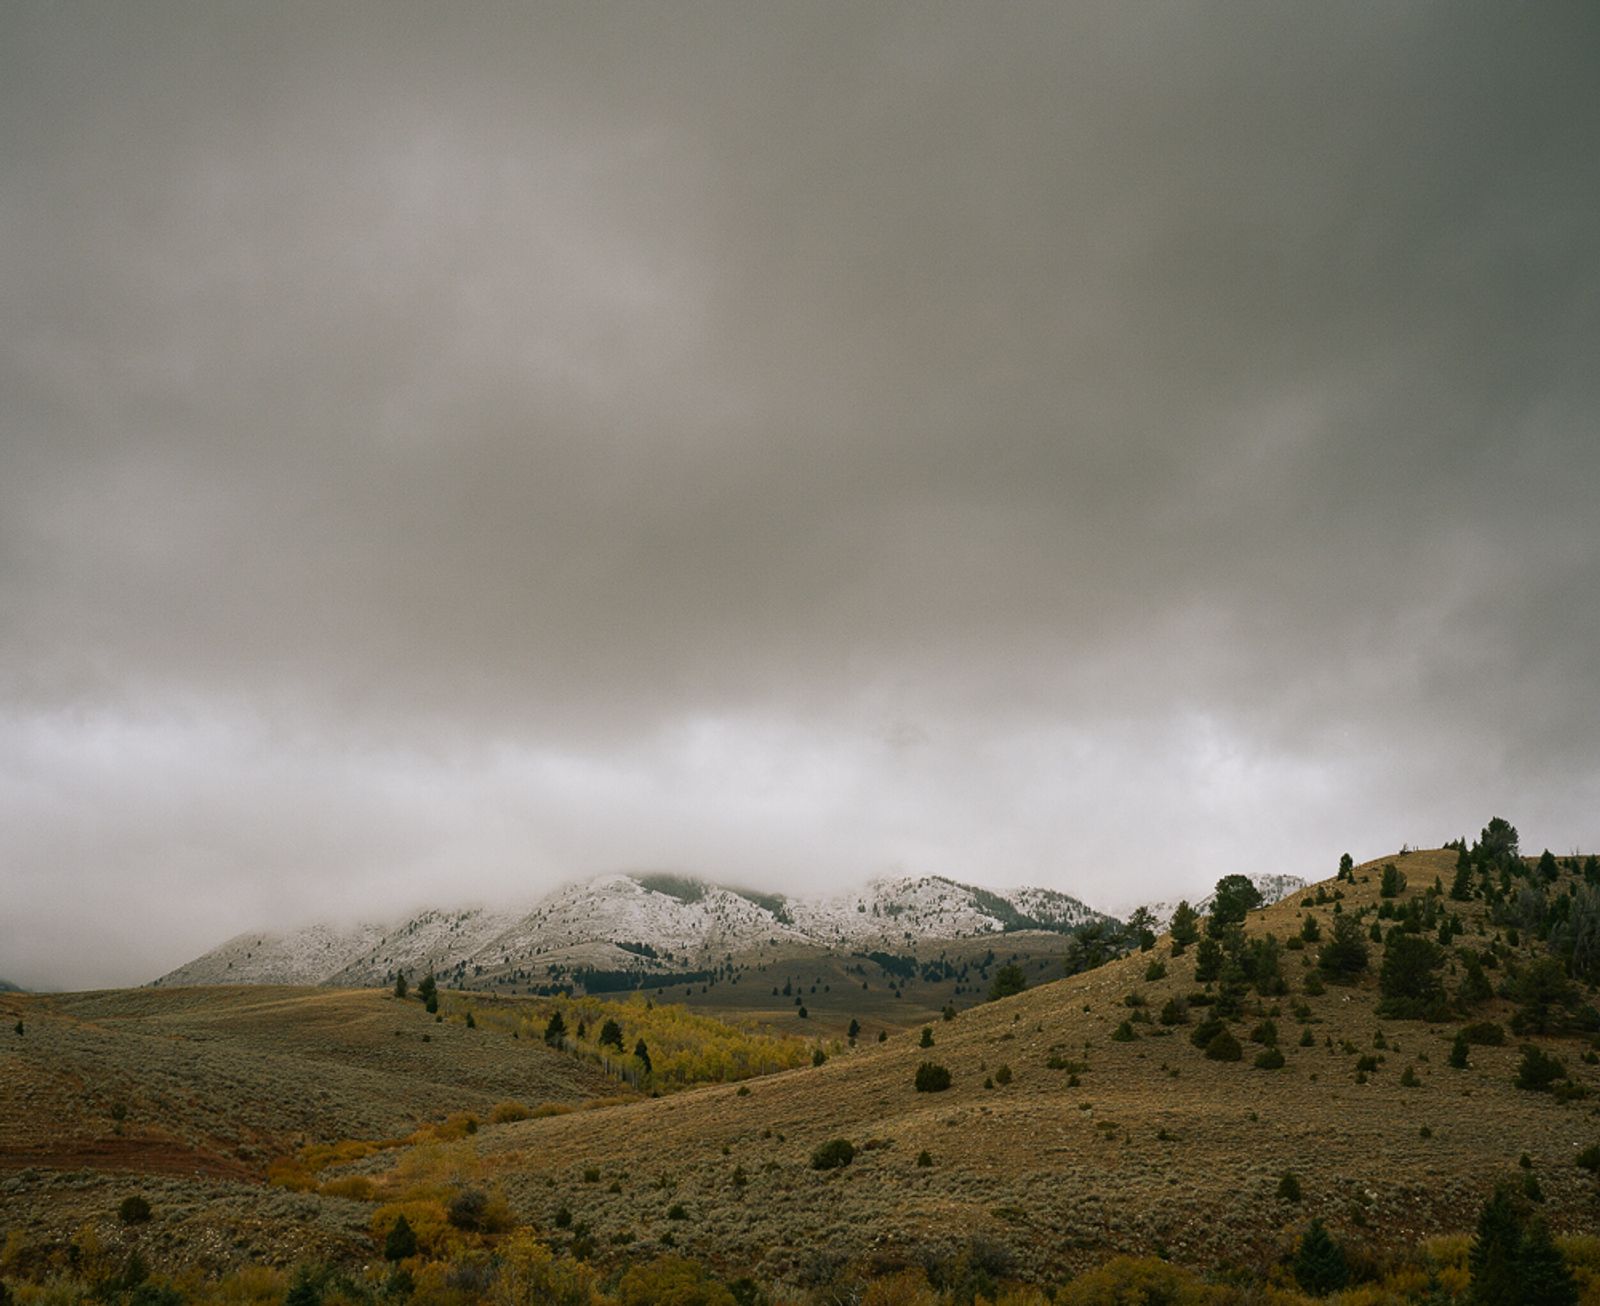 © Katrina D'autremont - Image from the The Other Mountain photography project